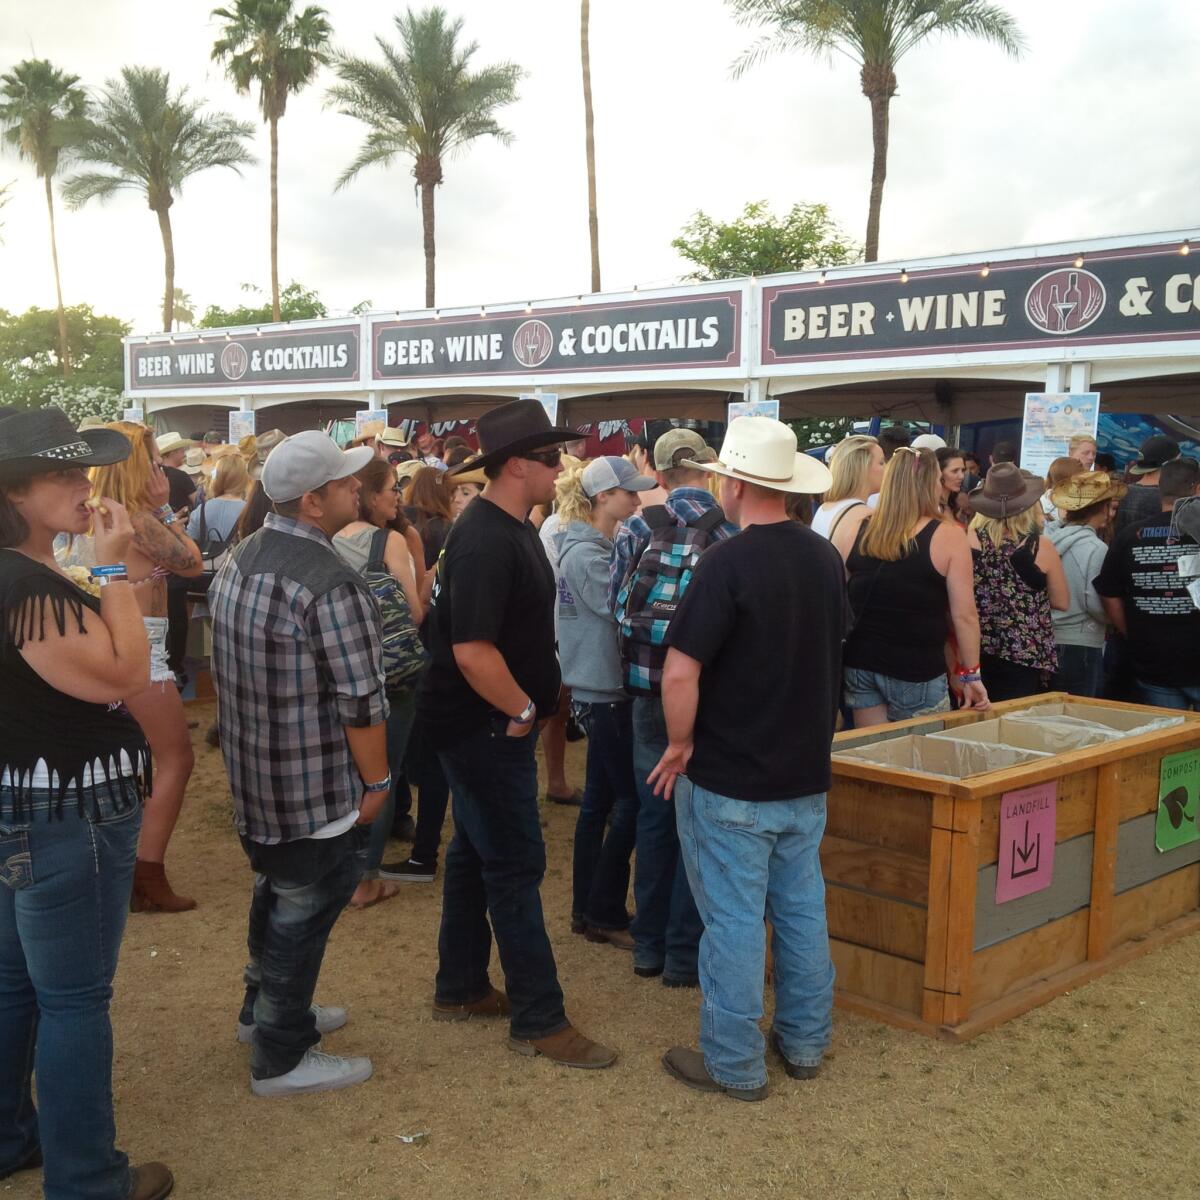 Performers and support staff at the Stagecoach Country Music Festival who are in recovery for alcohol or substance addictions can attend support meetings at Safe Harbor Room sponsored and staffed by the Recording Academy's MusiCares Foundation.